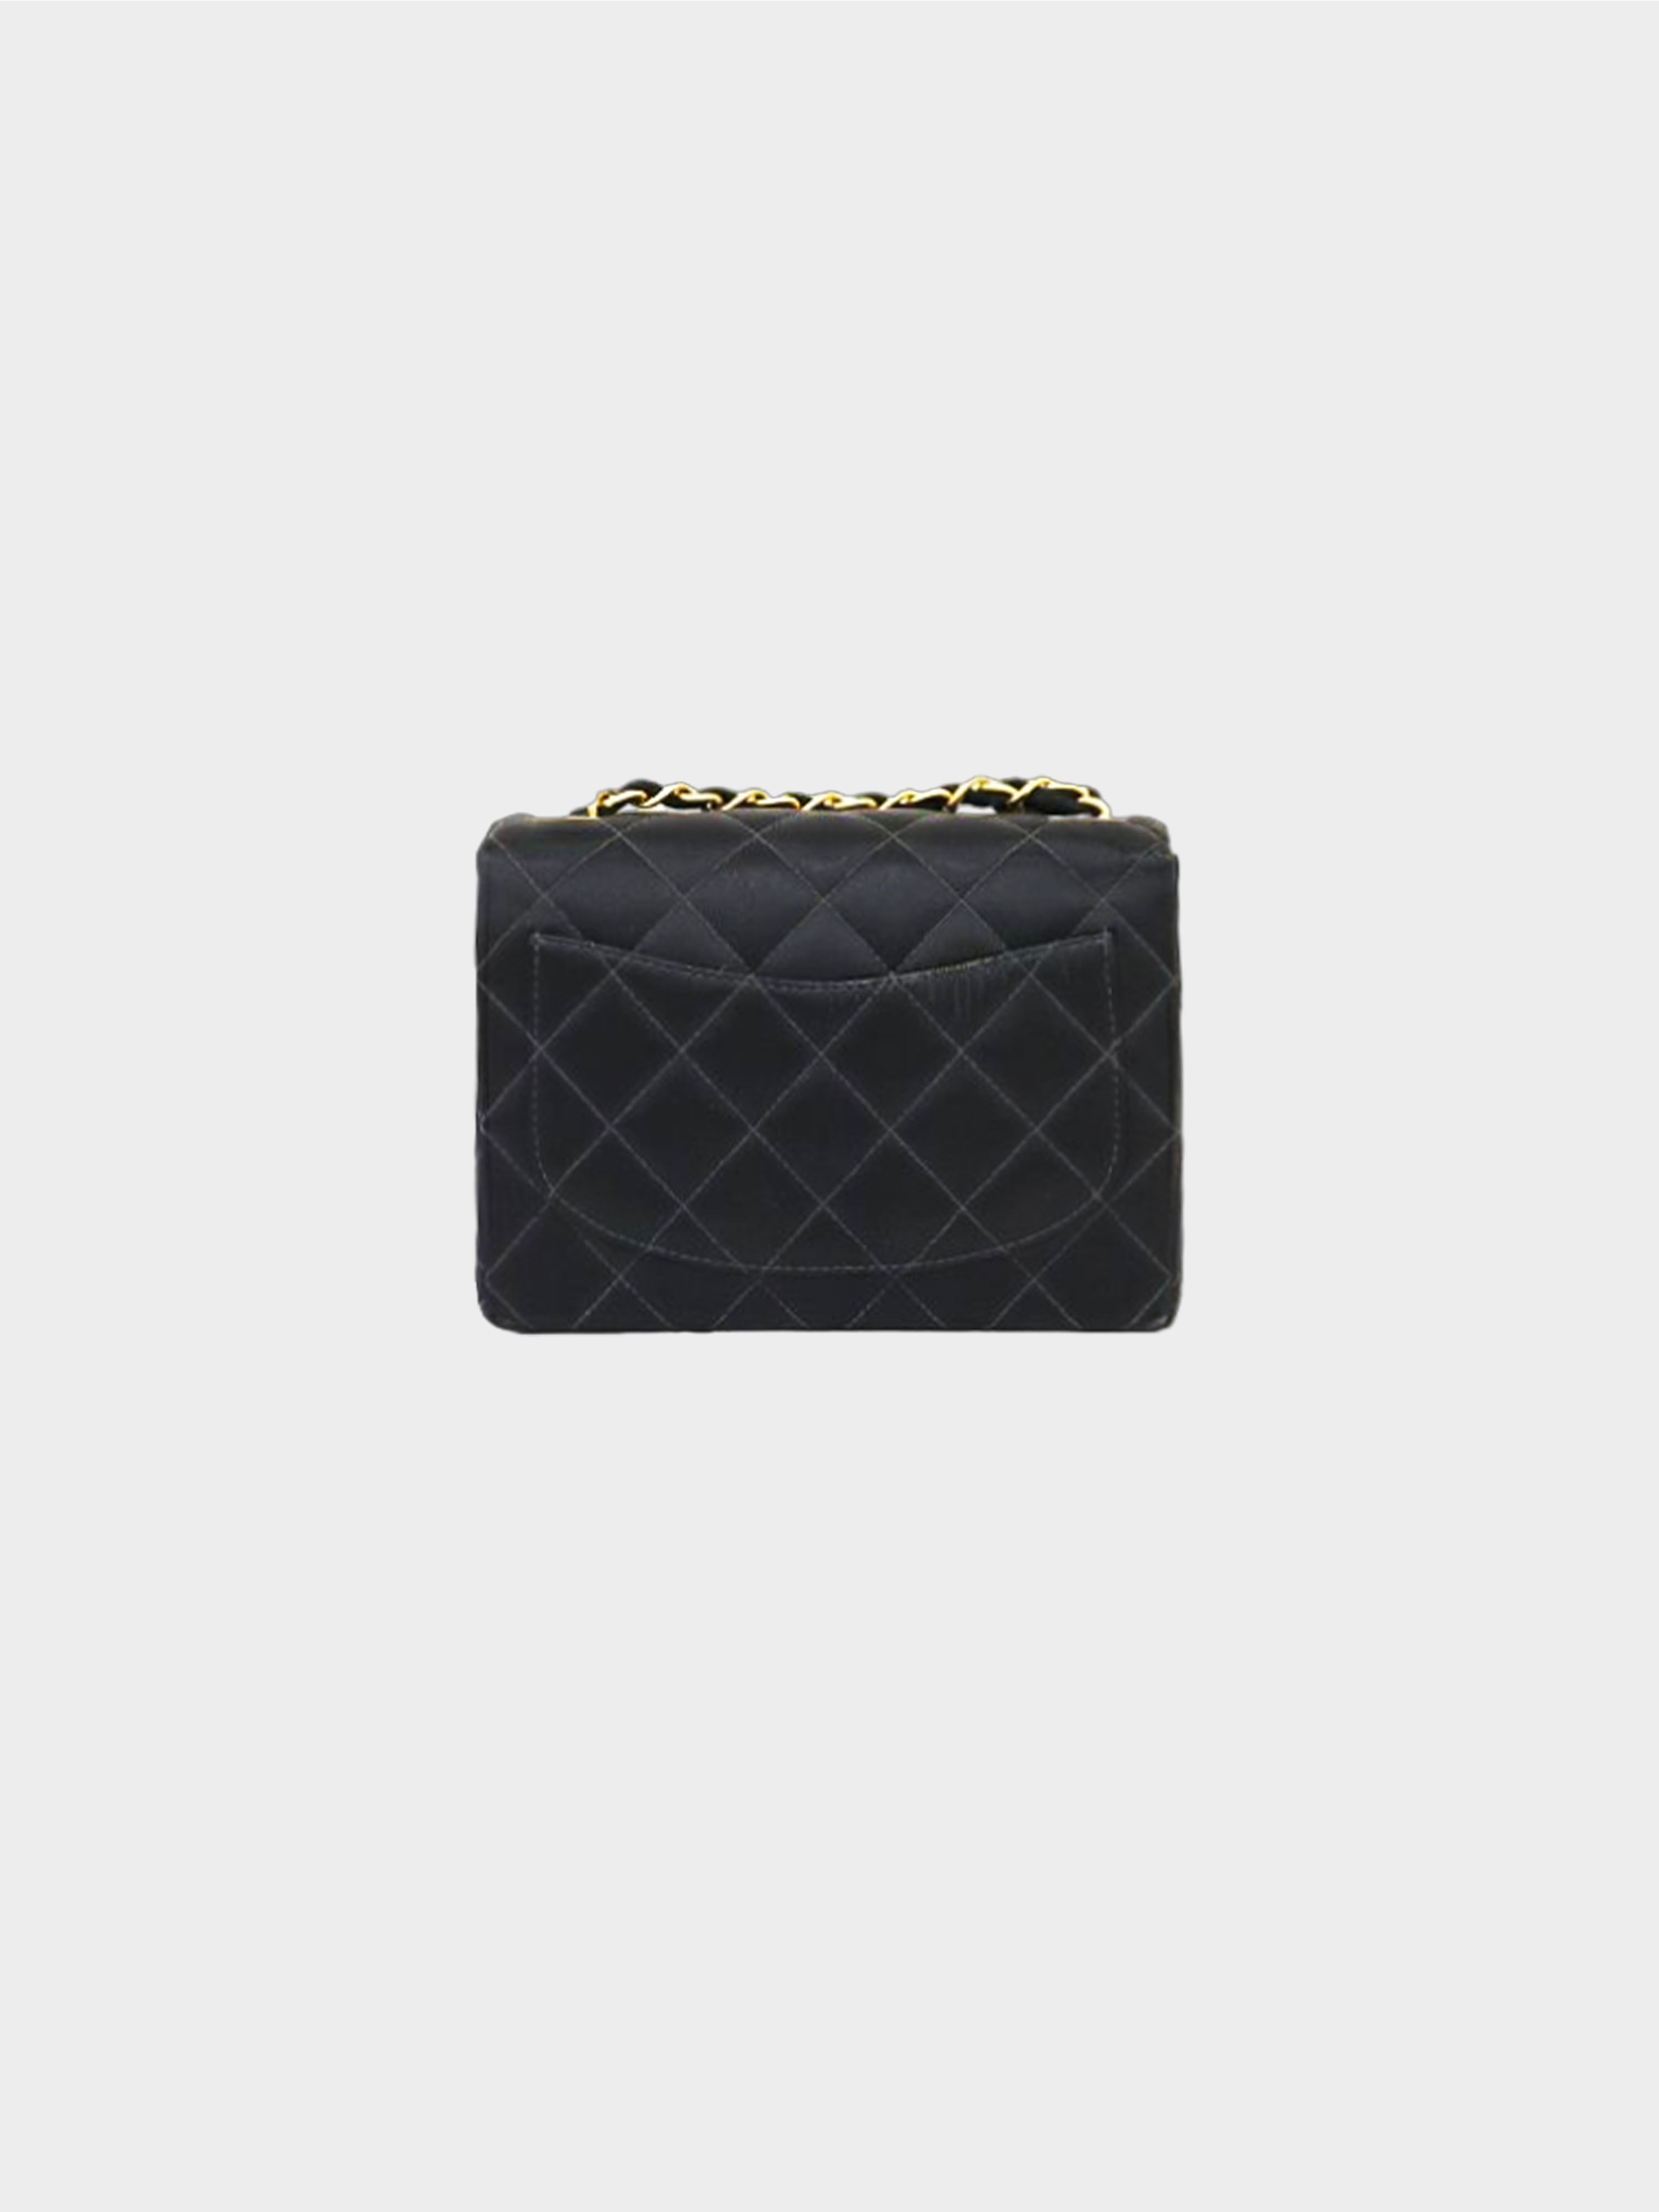 Vintage Chanel Black Quilted Satin Fabric Mini Pouch Coin 